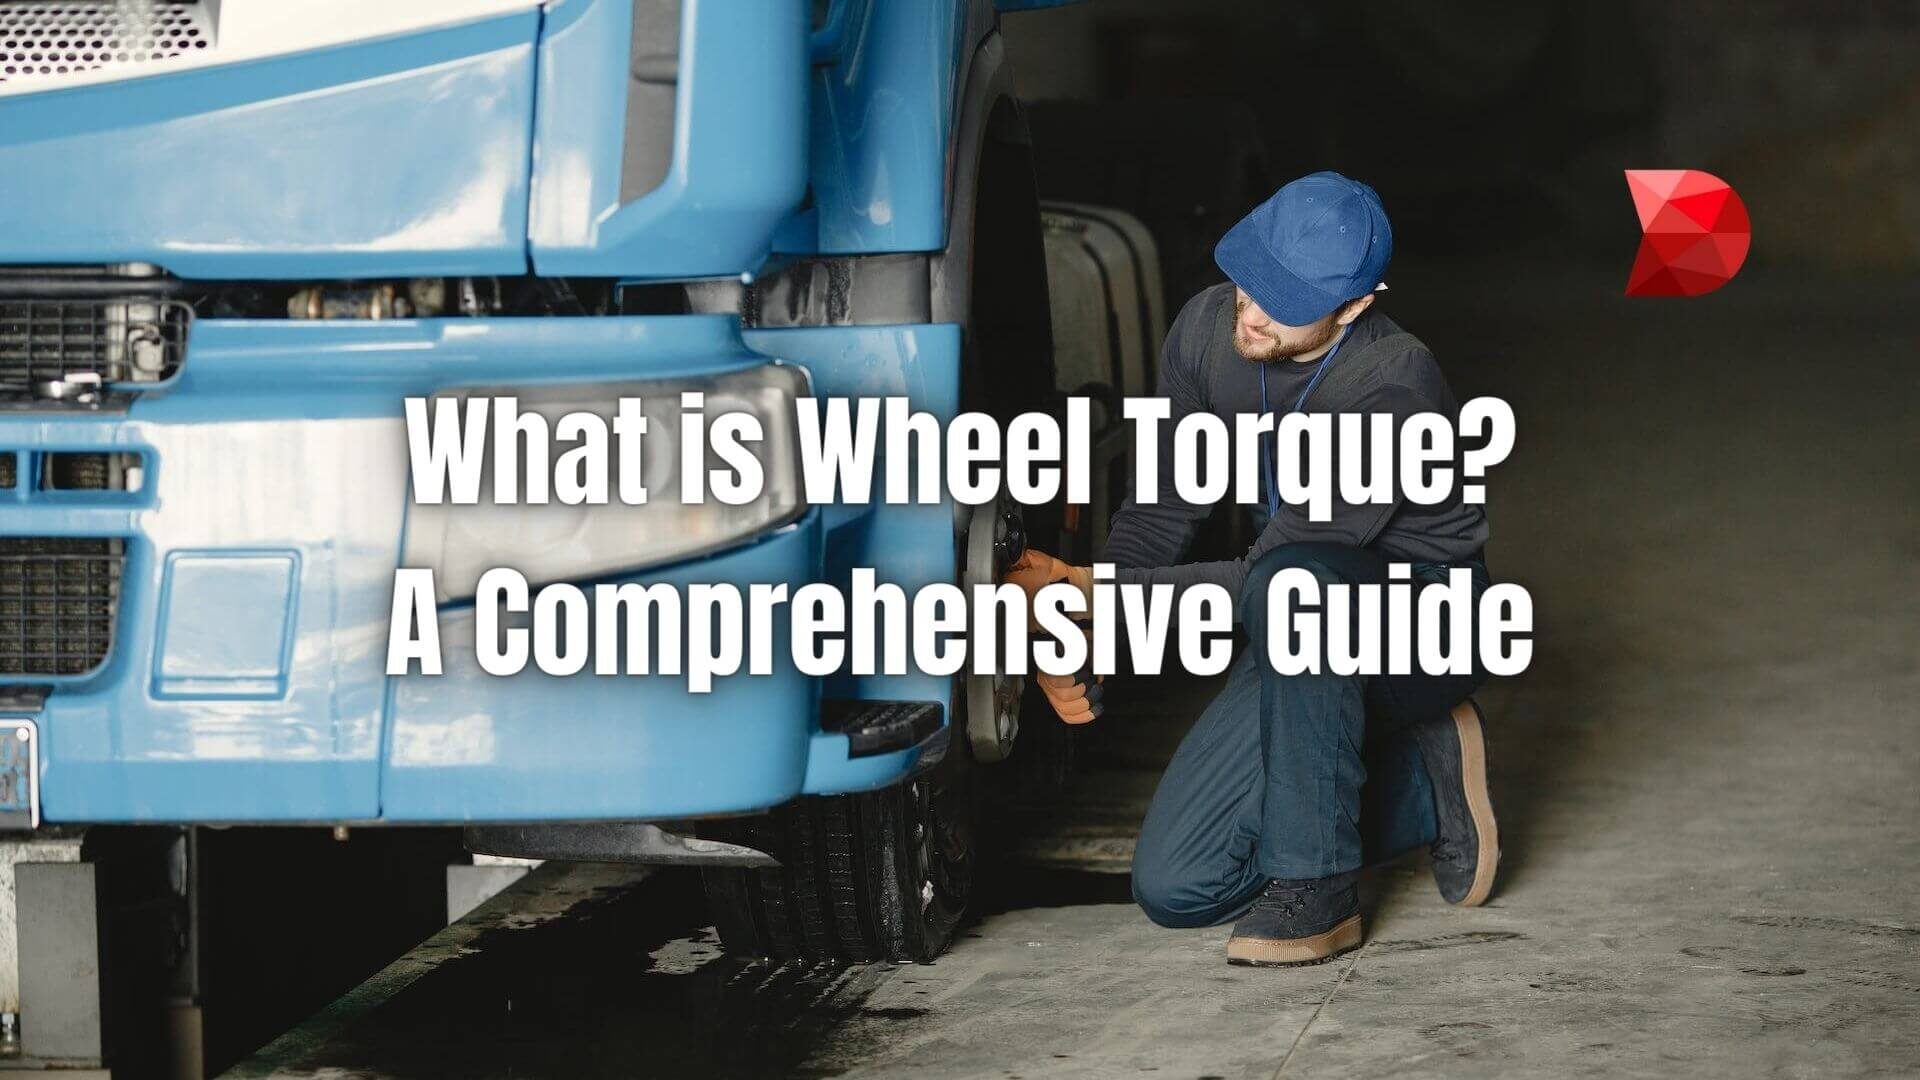 Unravel the significance of wheel torque! Click here to learn more about its importance, measurement, and impact on vehicle performance.